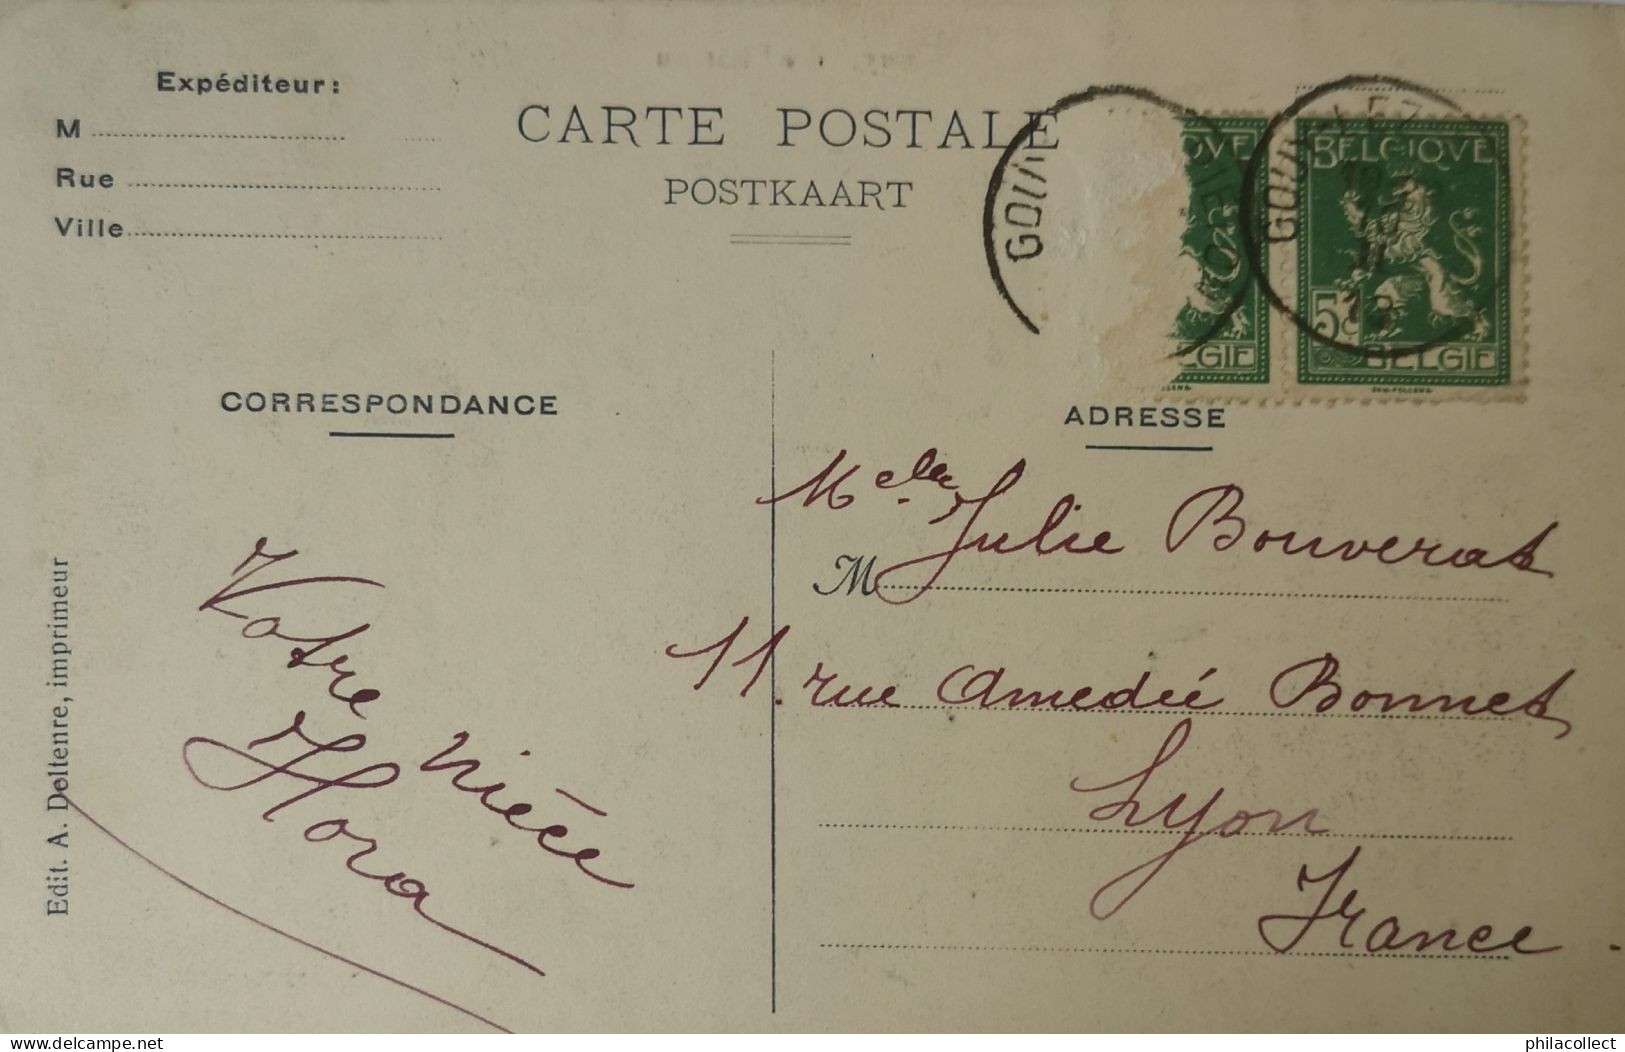 Gouy (les Pieton) Chateau (Entree - Animee) 191? - Other & Unclassified